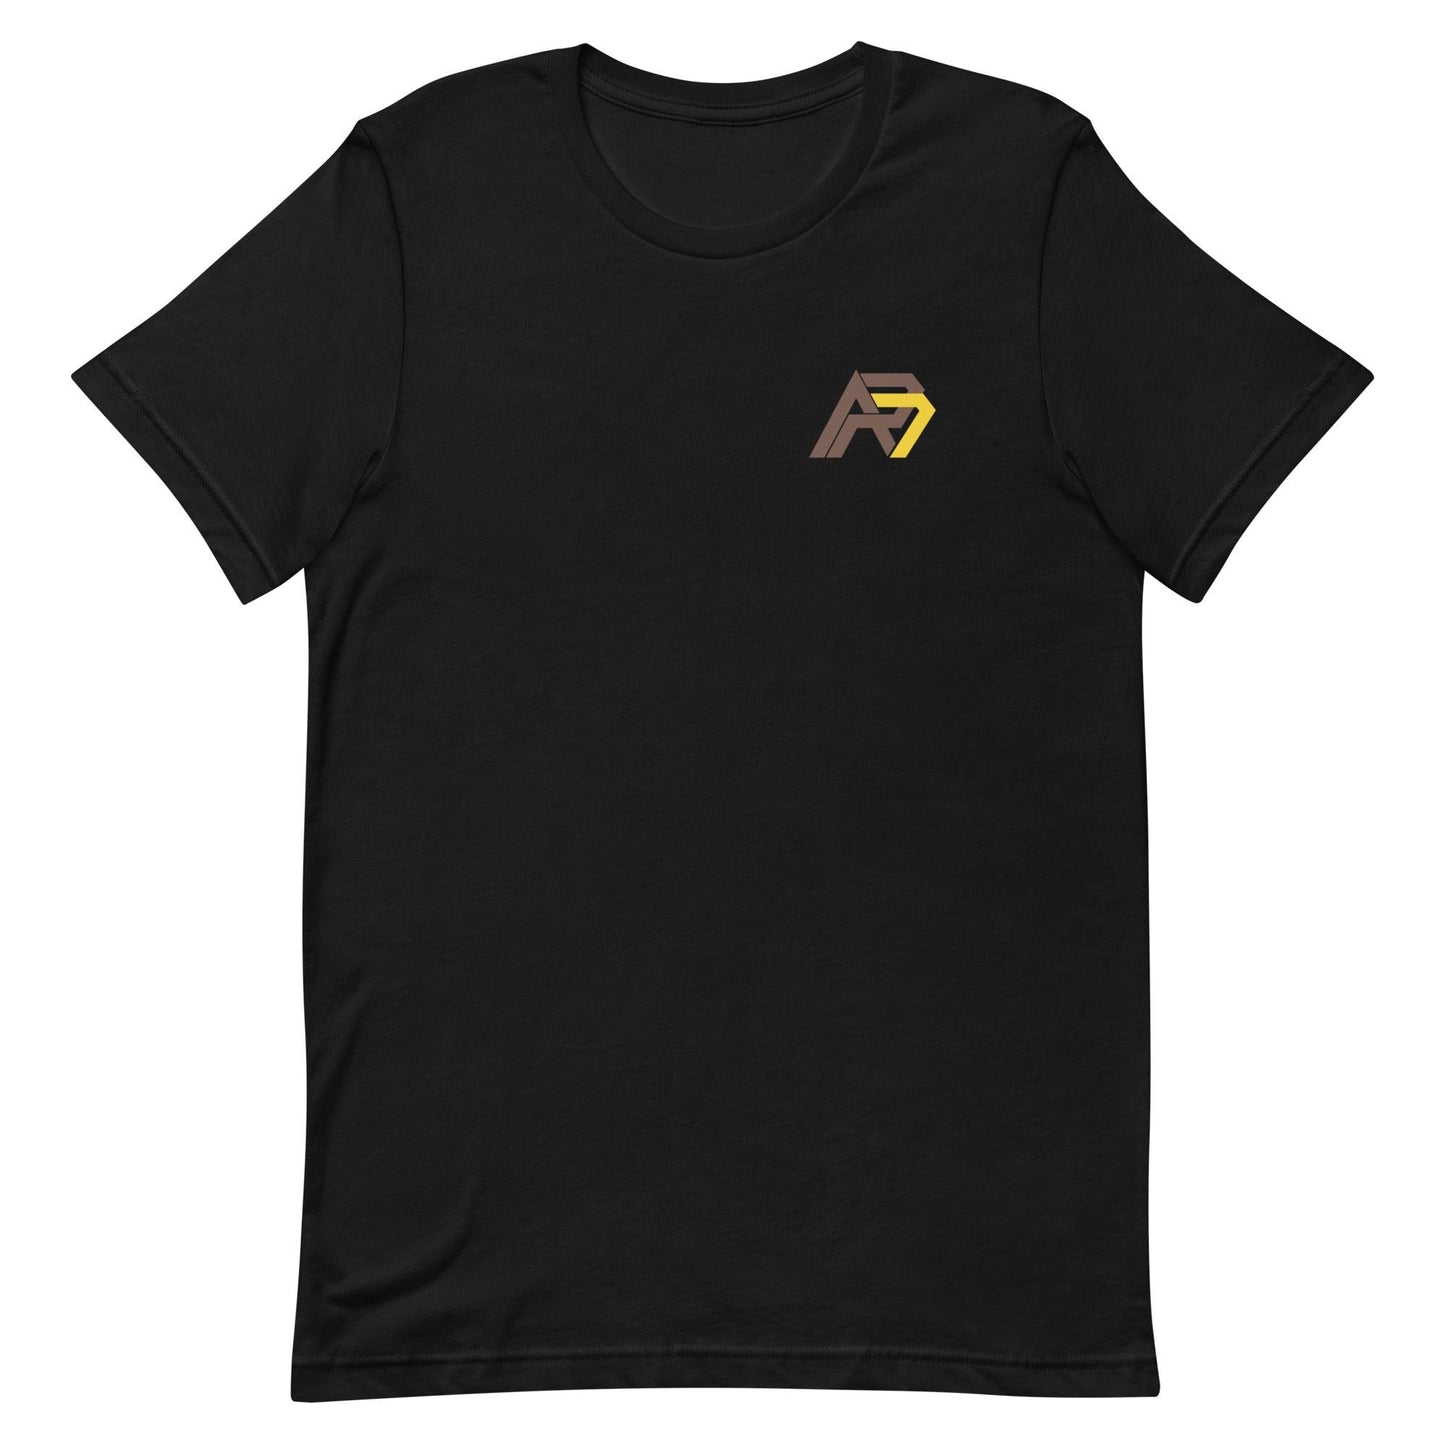 Anthony Romphf "Essential" t-shirt - Fan Arch